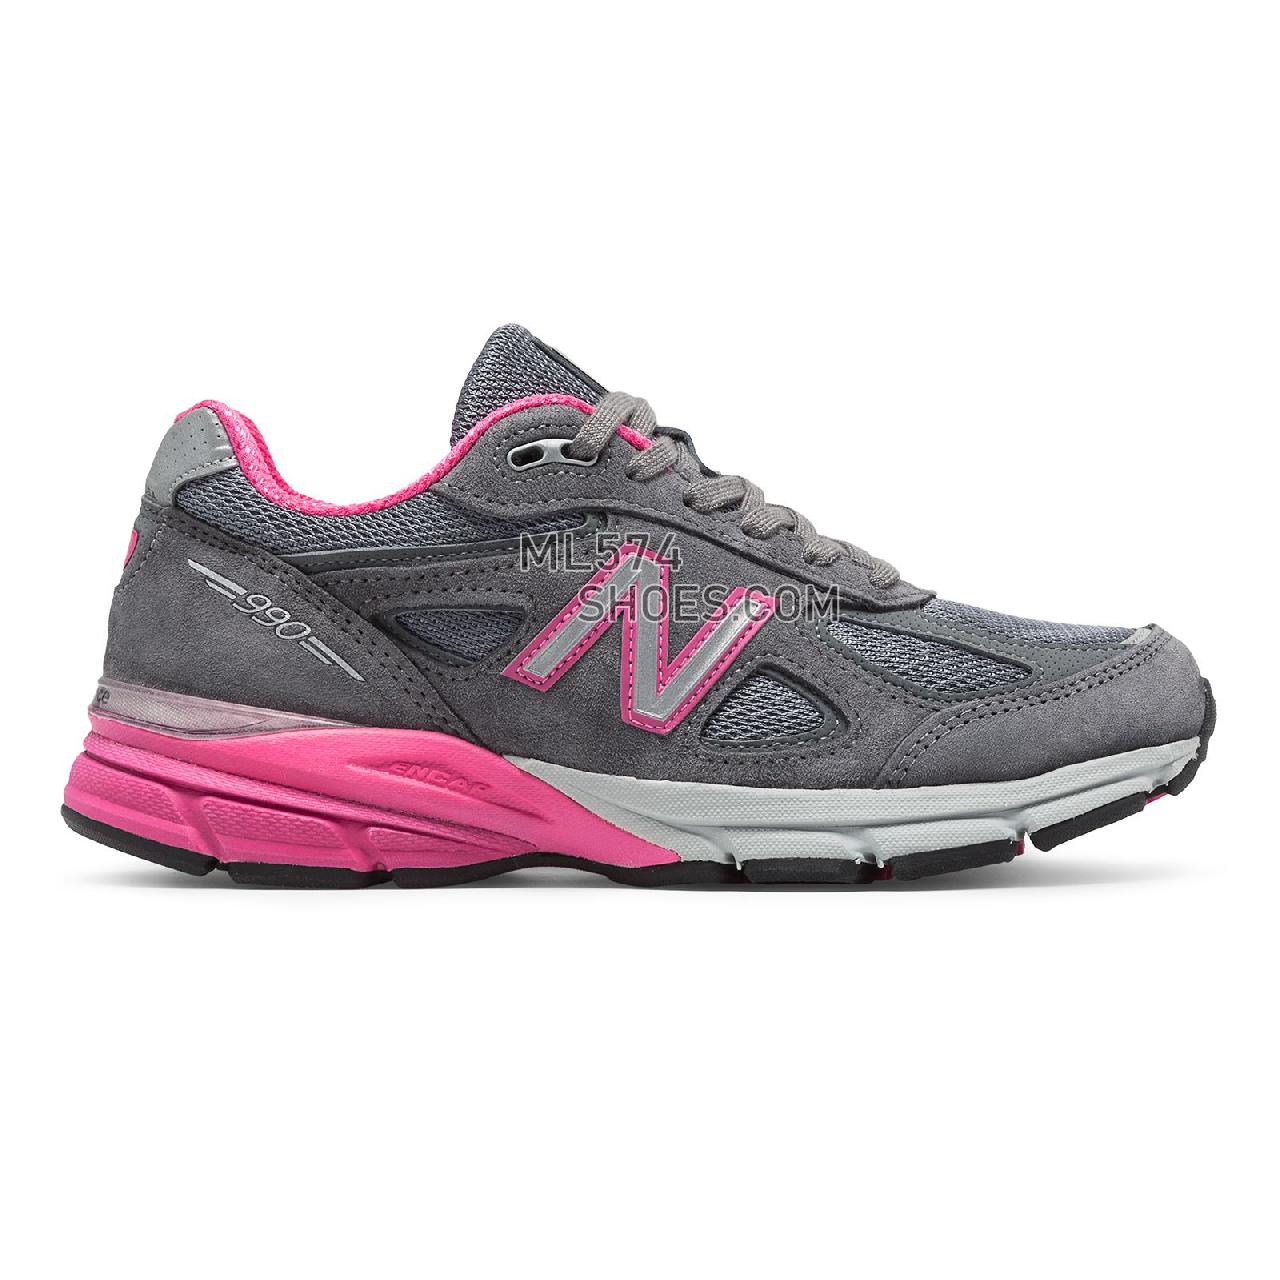 New Balance Womens 990v4 Made in US - Women's 990 - Running Grey with Pink Zing - W990GP4